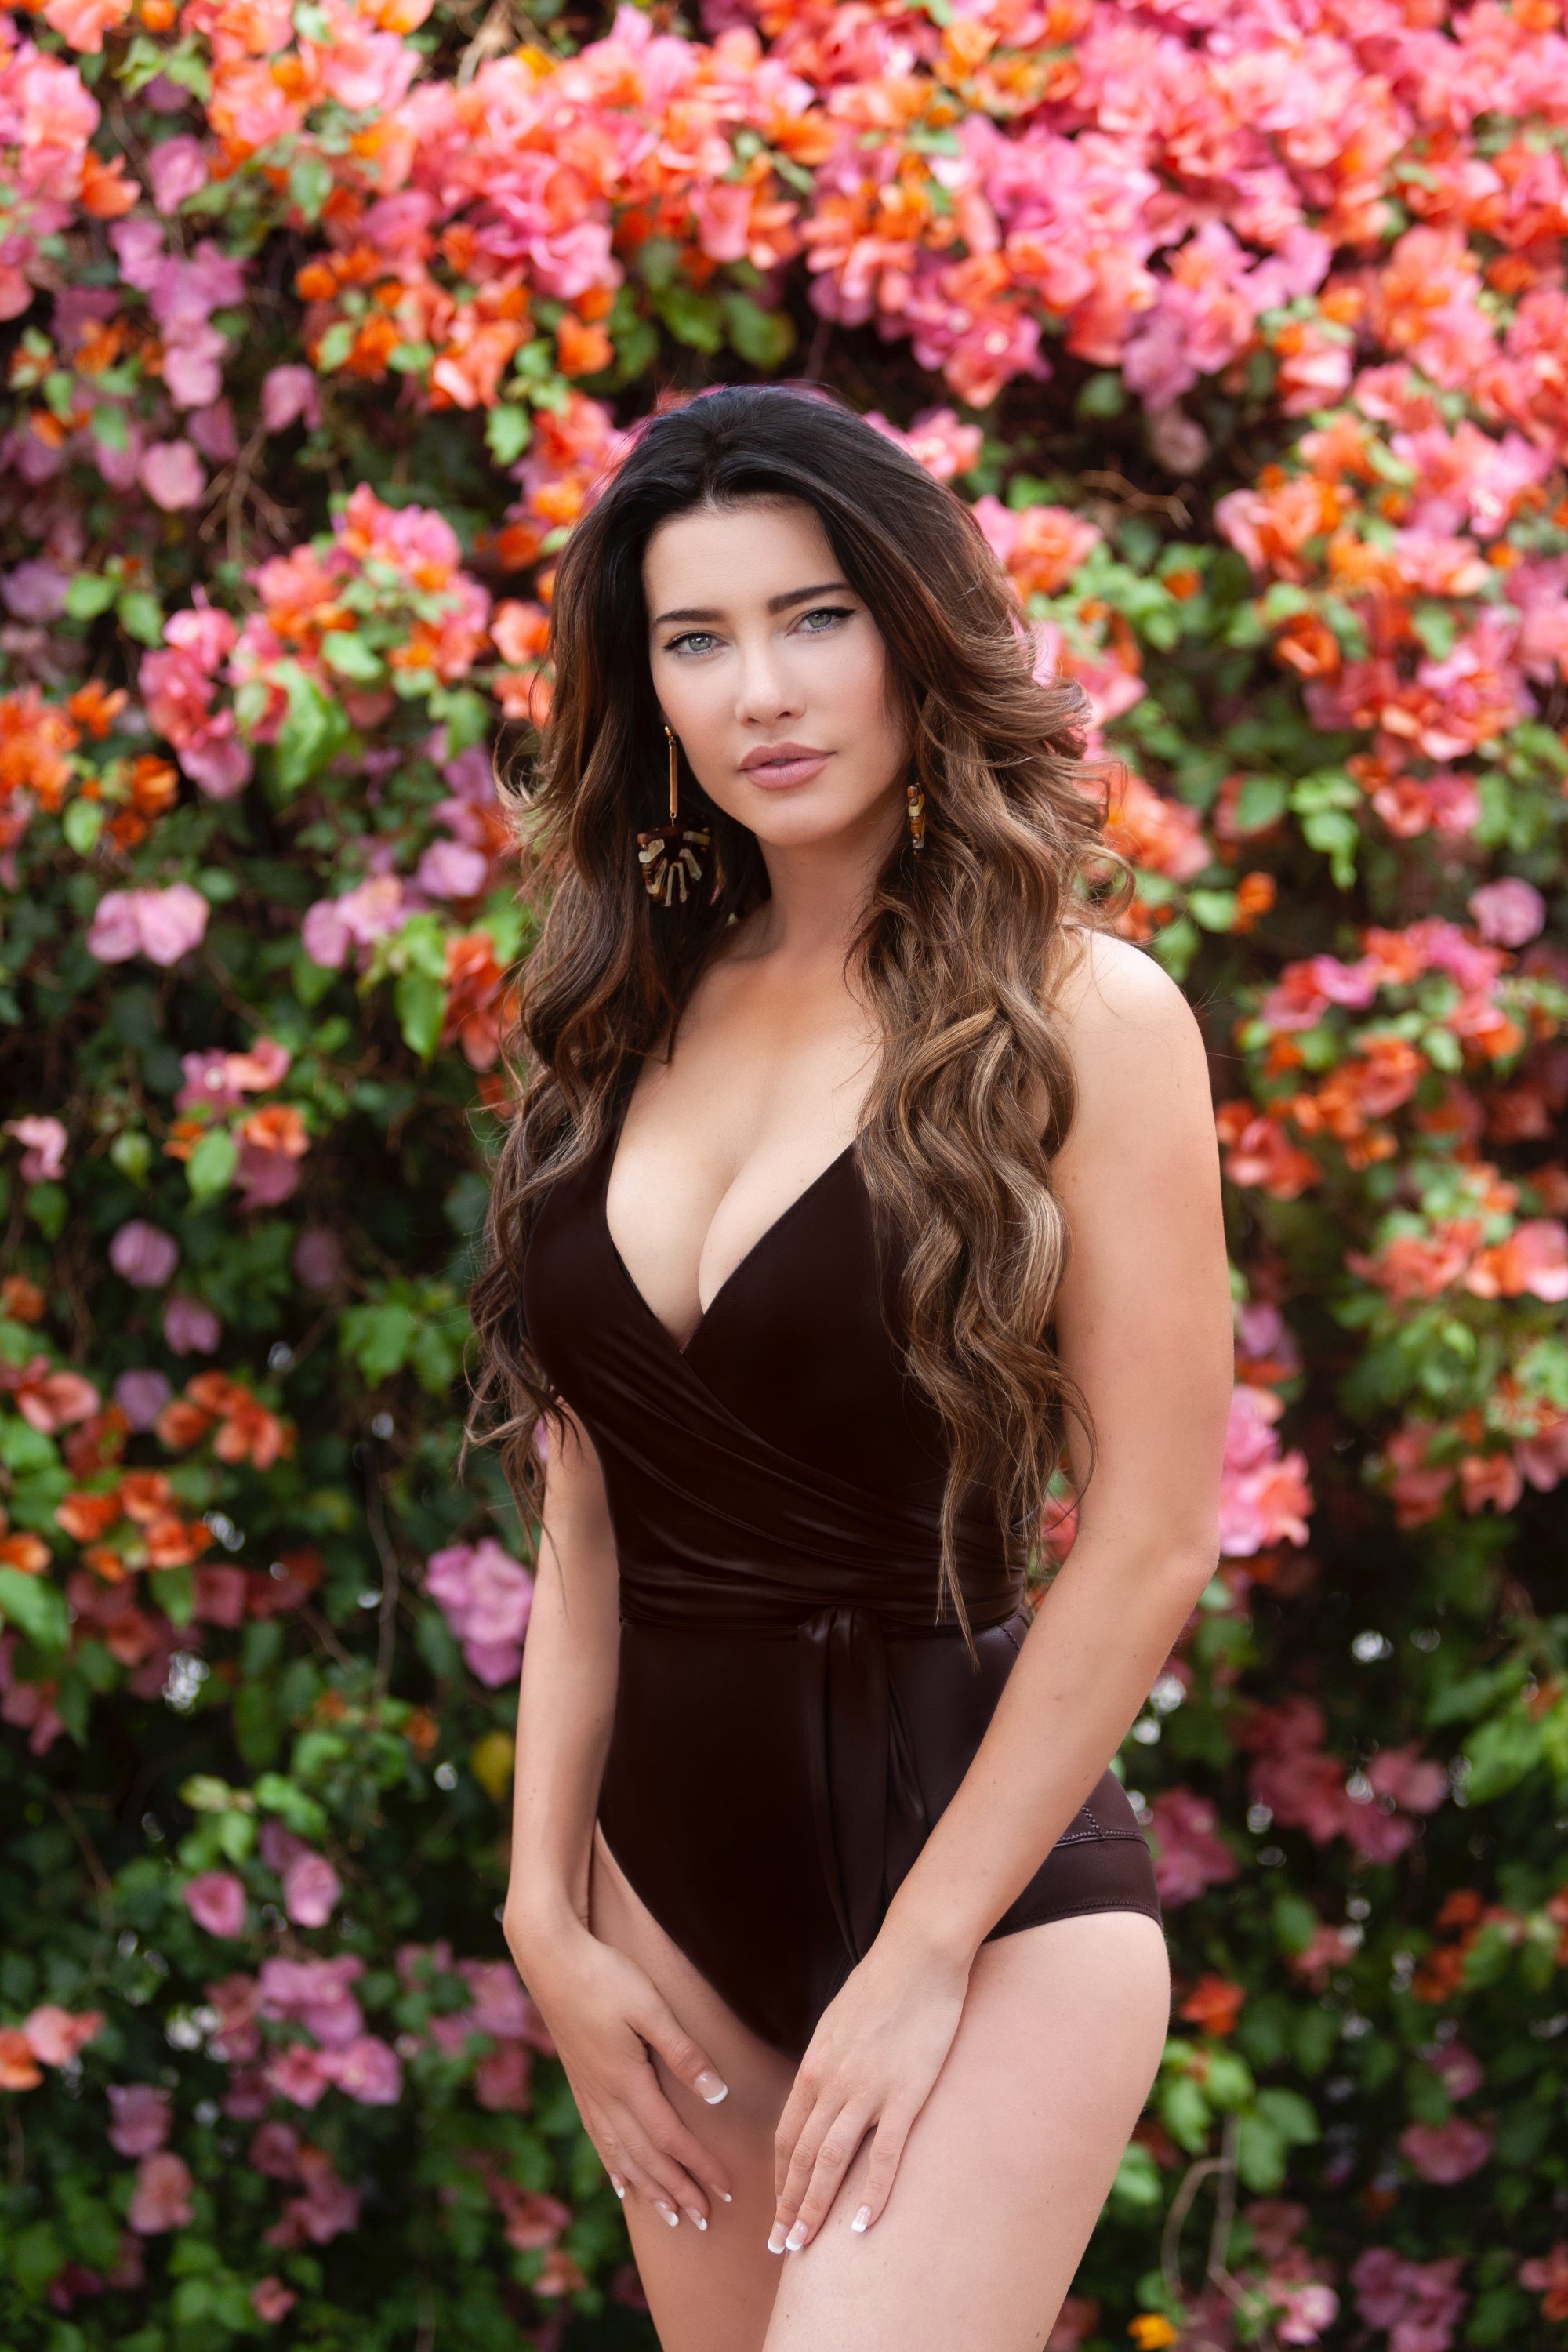 'The Bold and the Beautiful' star Jacqueline MacInnes Wood posing for a photo in a black swimsuit